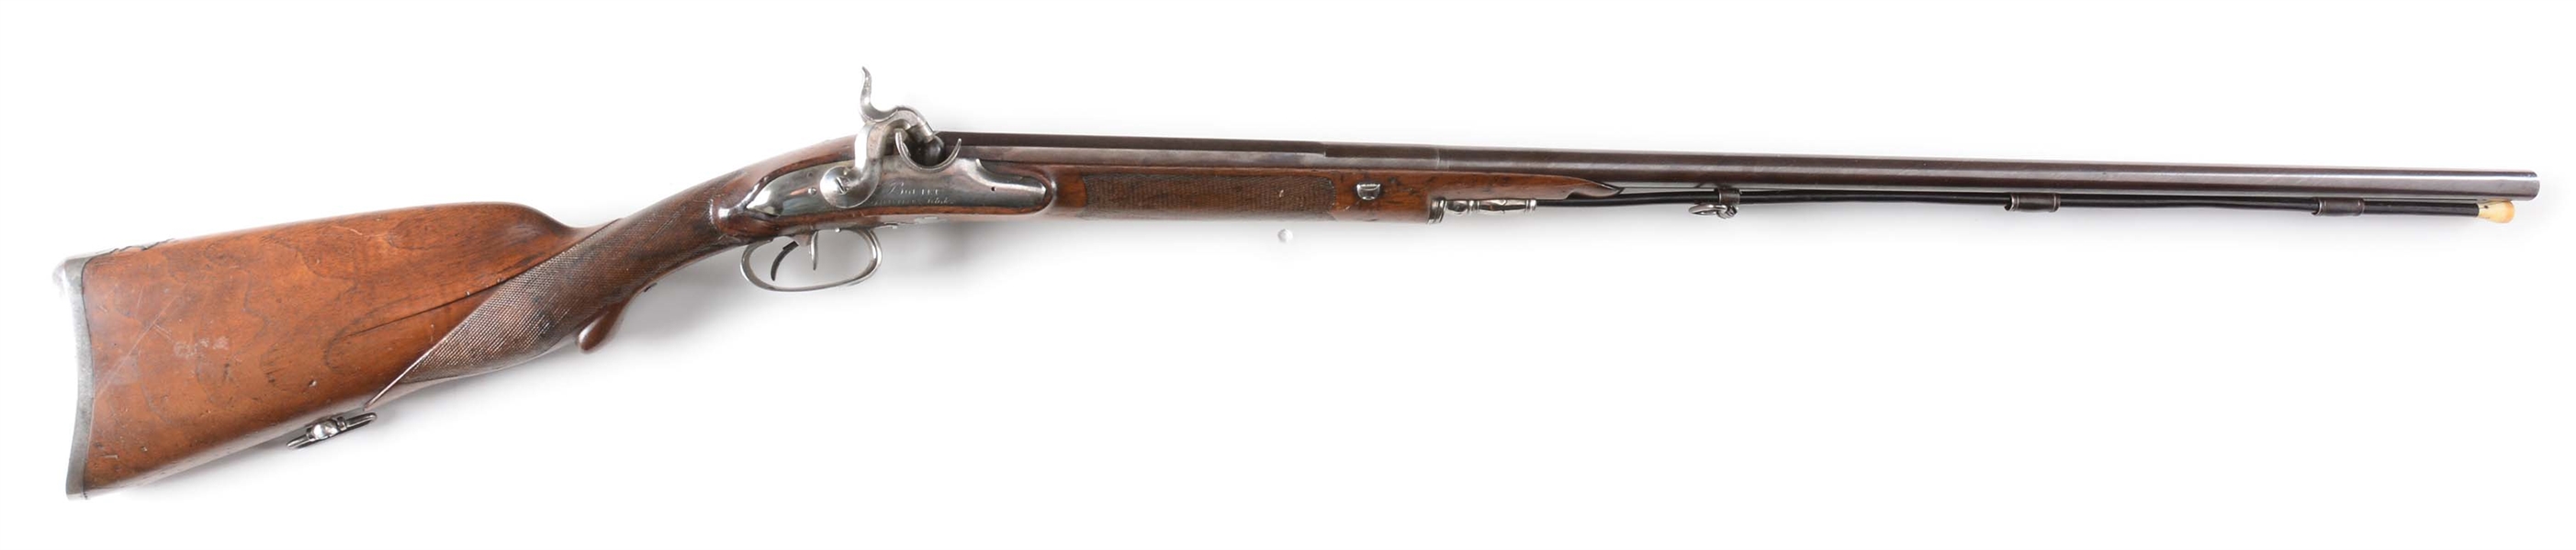 (A) SUPERB QUALITY PERCUSSION SHOTGUN BY NICOLAS NOEL BOUTET CONVERTED FROM FLINTLOCK.